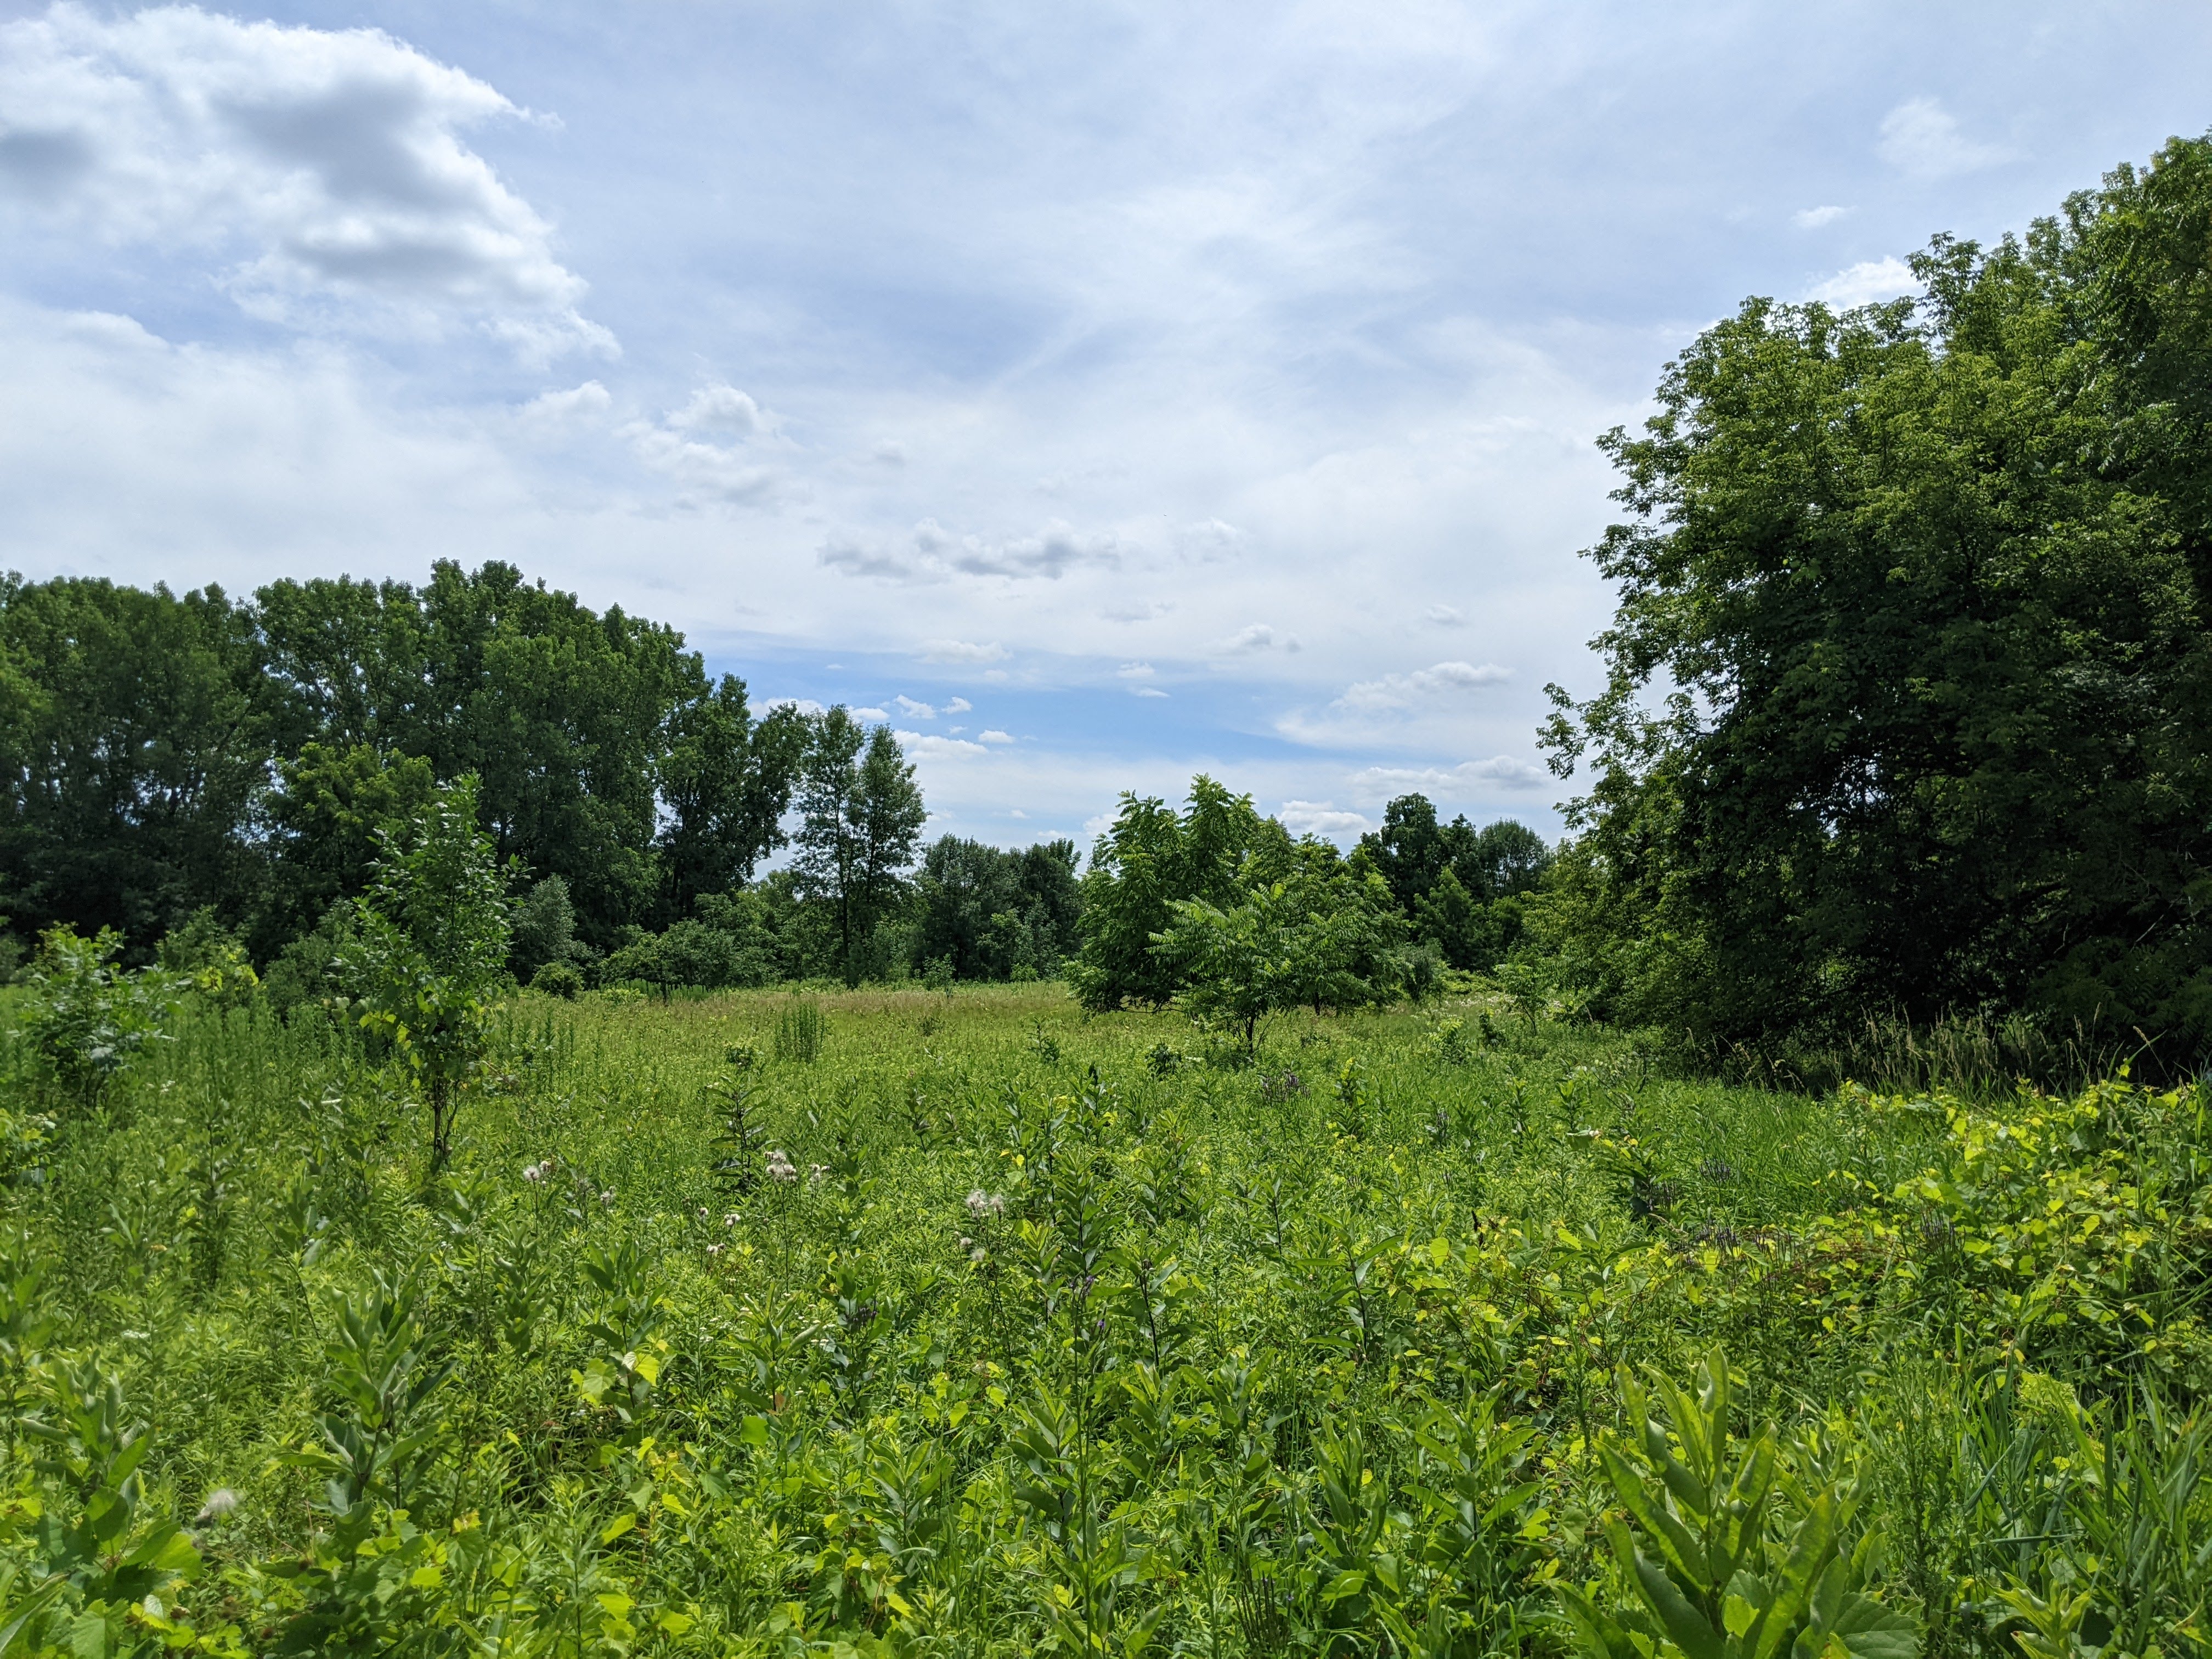 Coughlin Community Natural Area